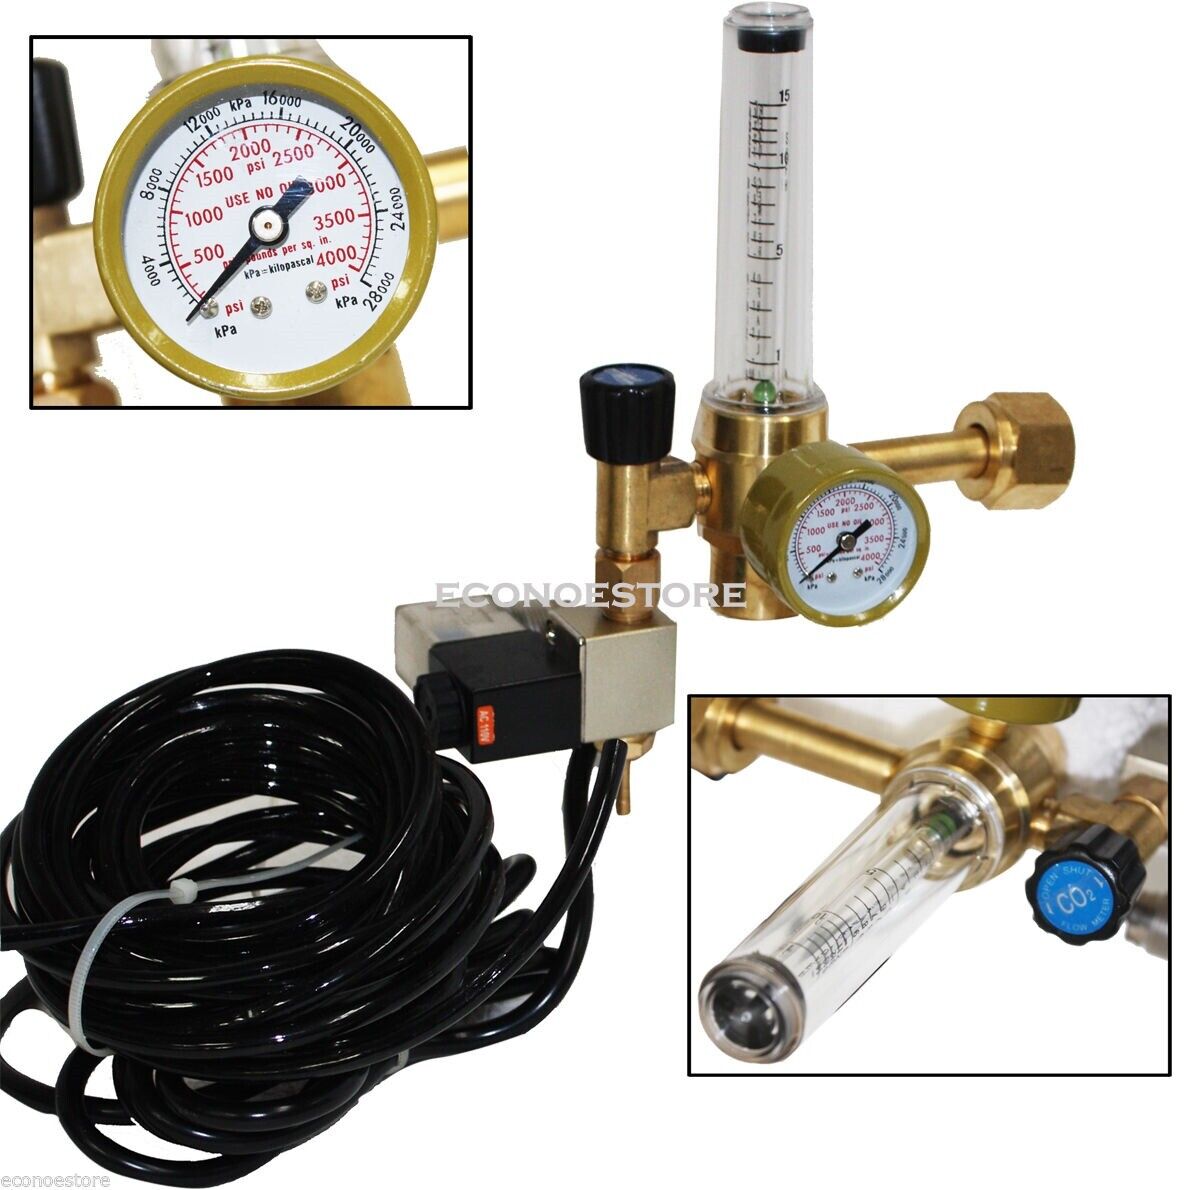 2x Hydroponics CO2 Regulator Flow Meter Control Extoic Injection System